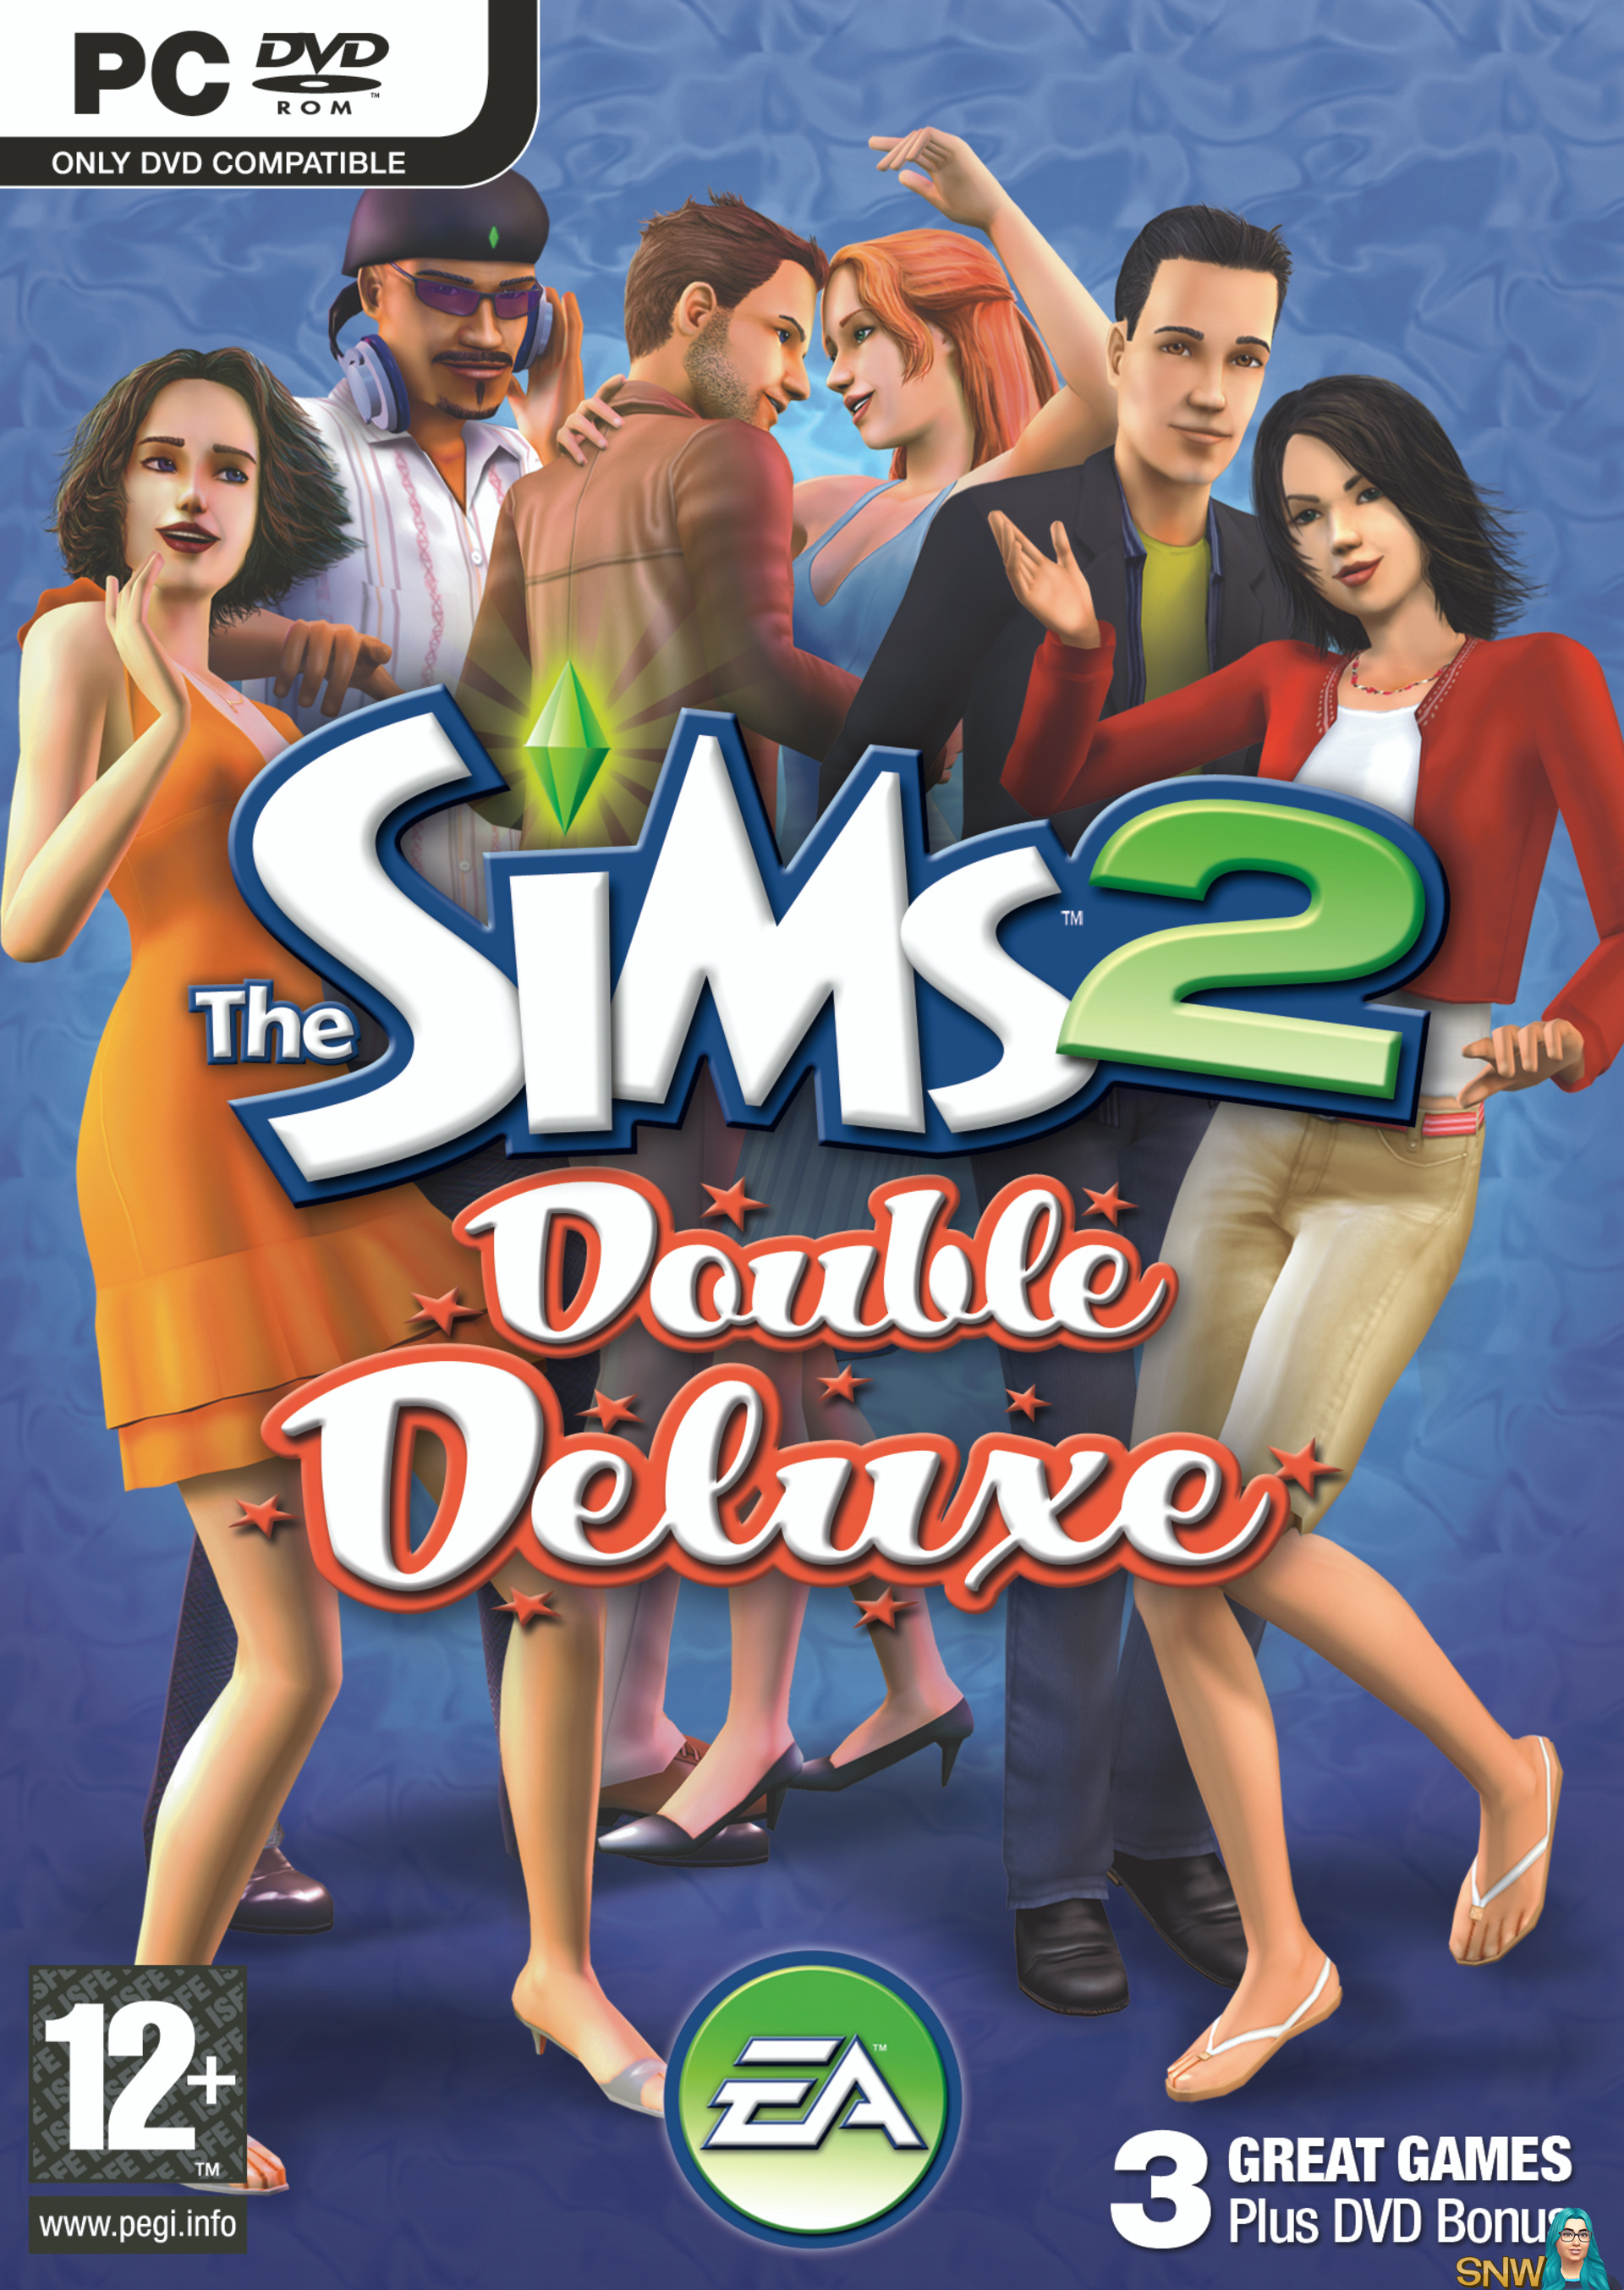 sims 4 deluxe english mac torrent